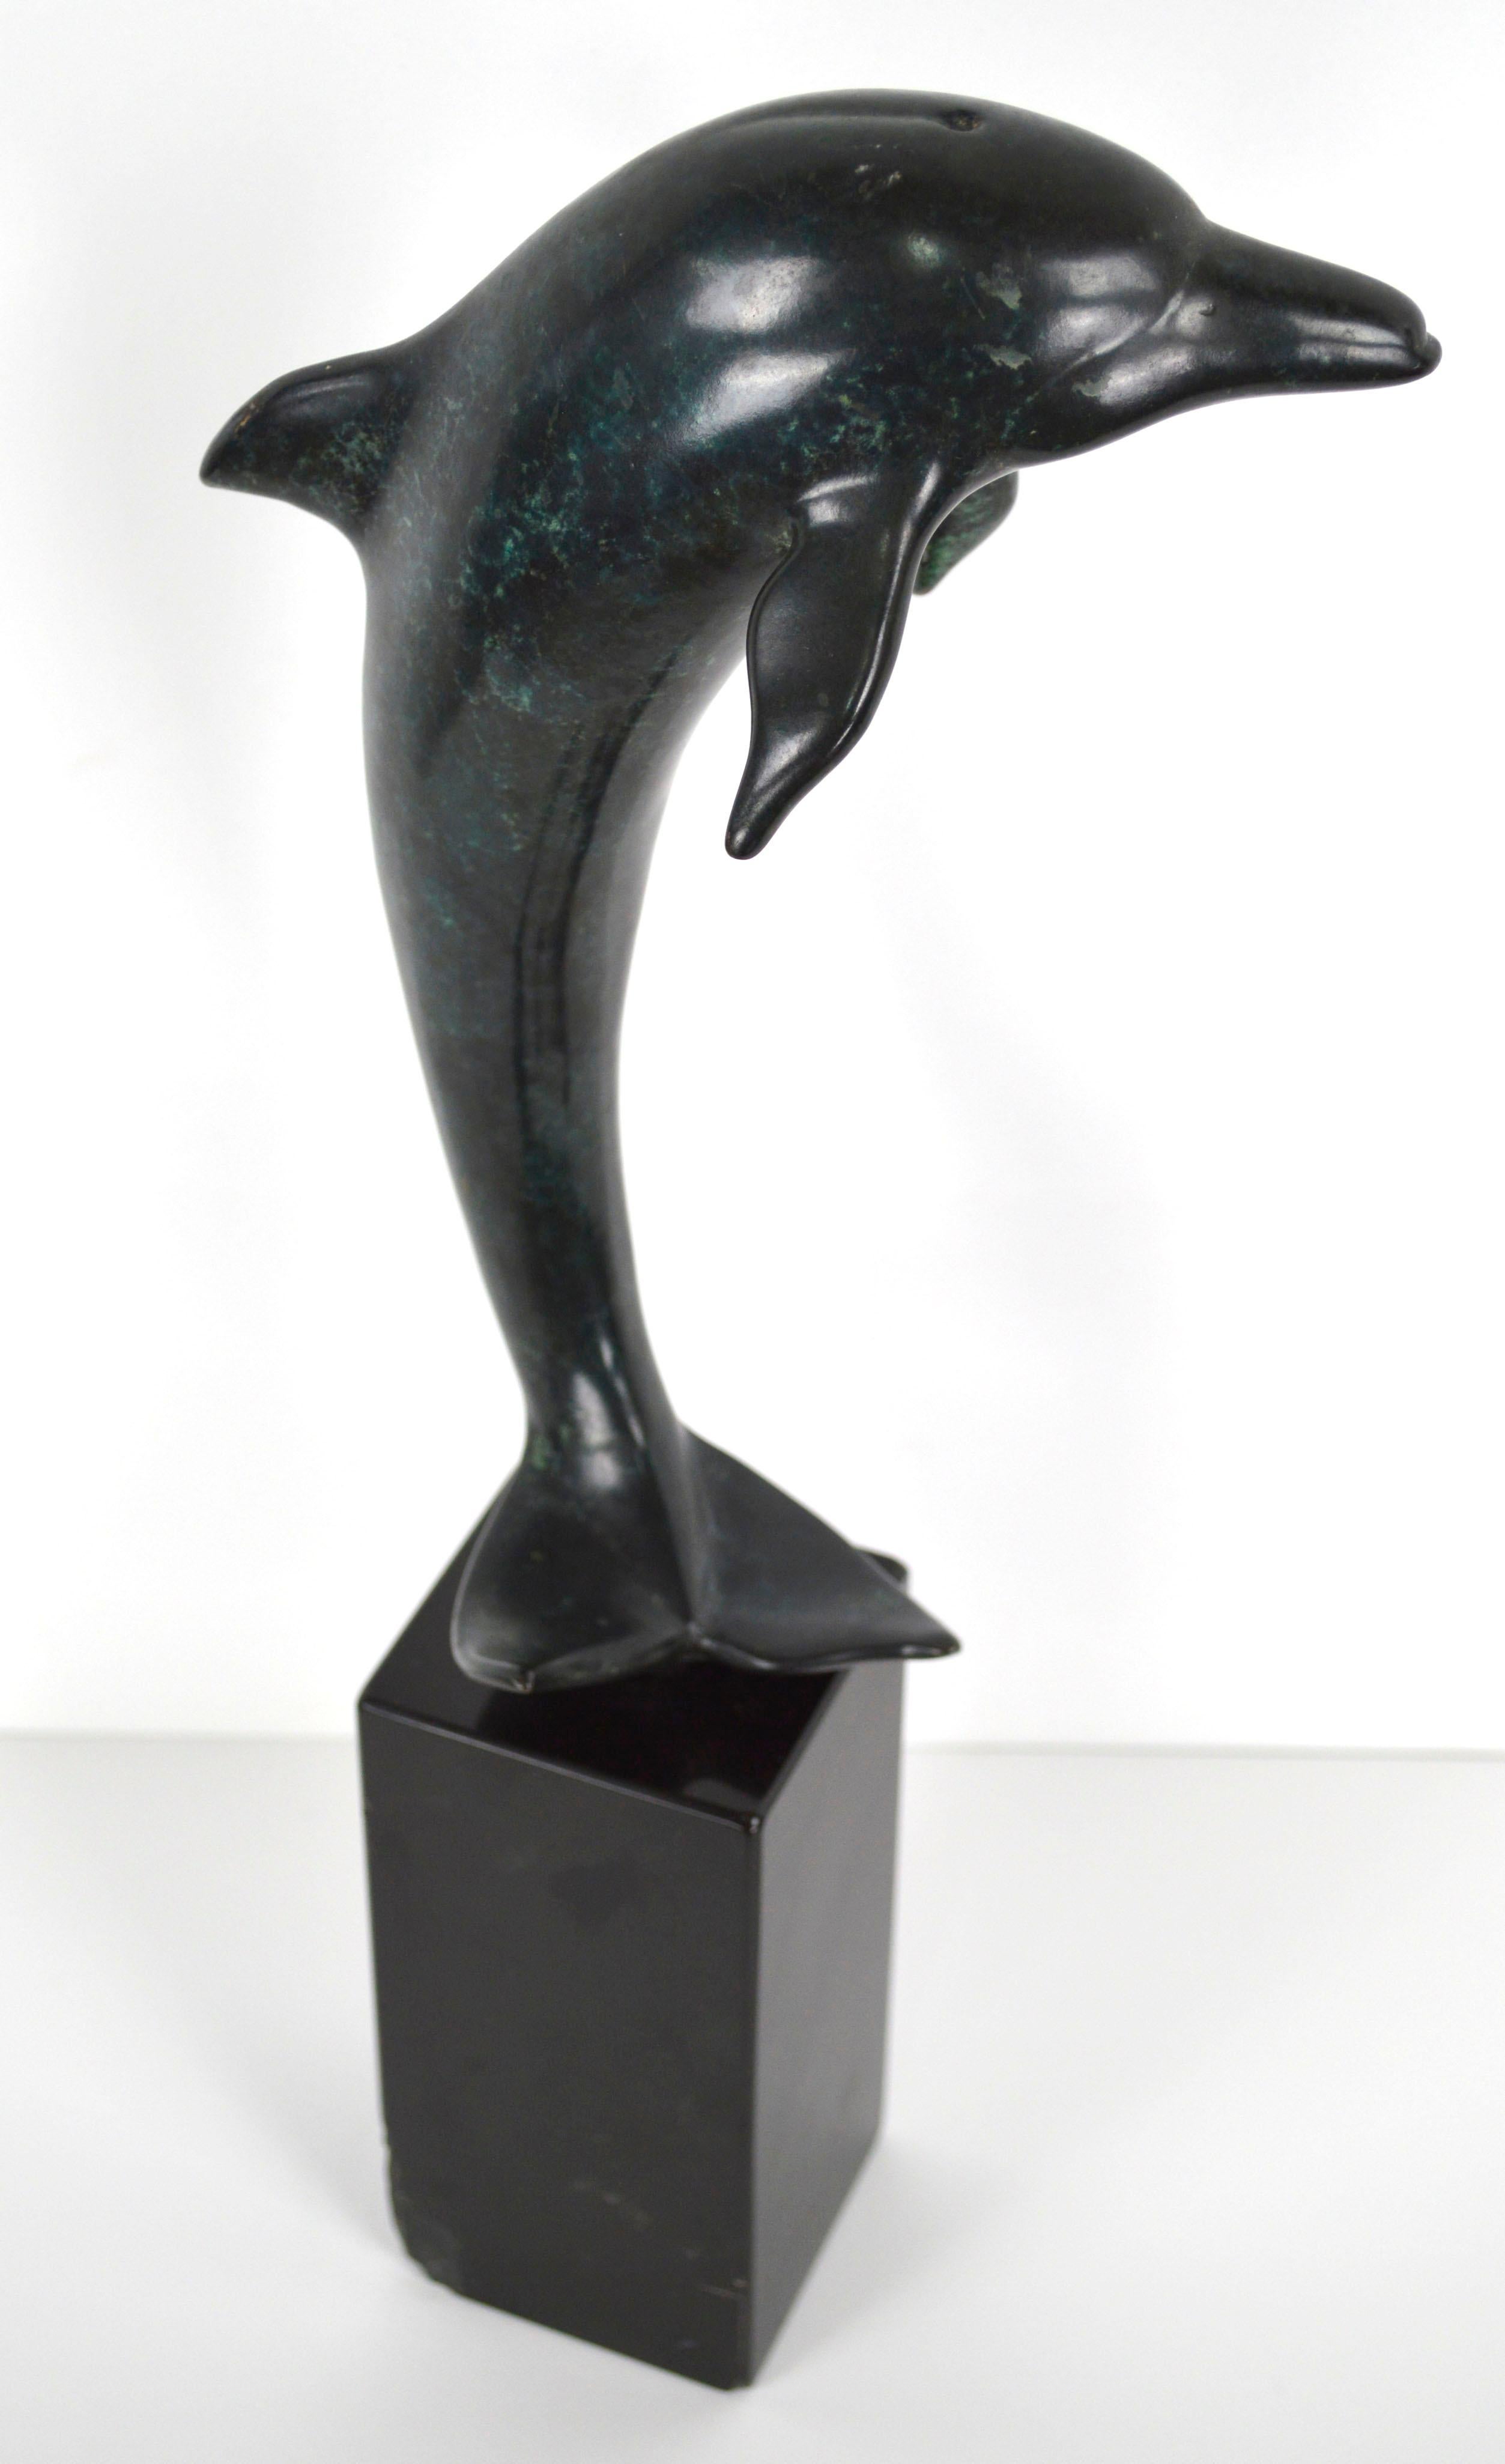 Contemporary Patinated Bronze Dolphin Sculpture

Elegant patinated cast bronze dolphin sculpture on granite base by renowned sculptor John Jagger (American, d.2013). Artist has etched signature and edition number on underside of tail fin, 